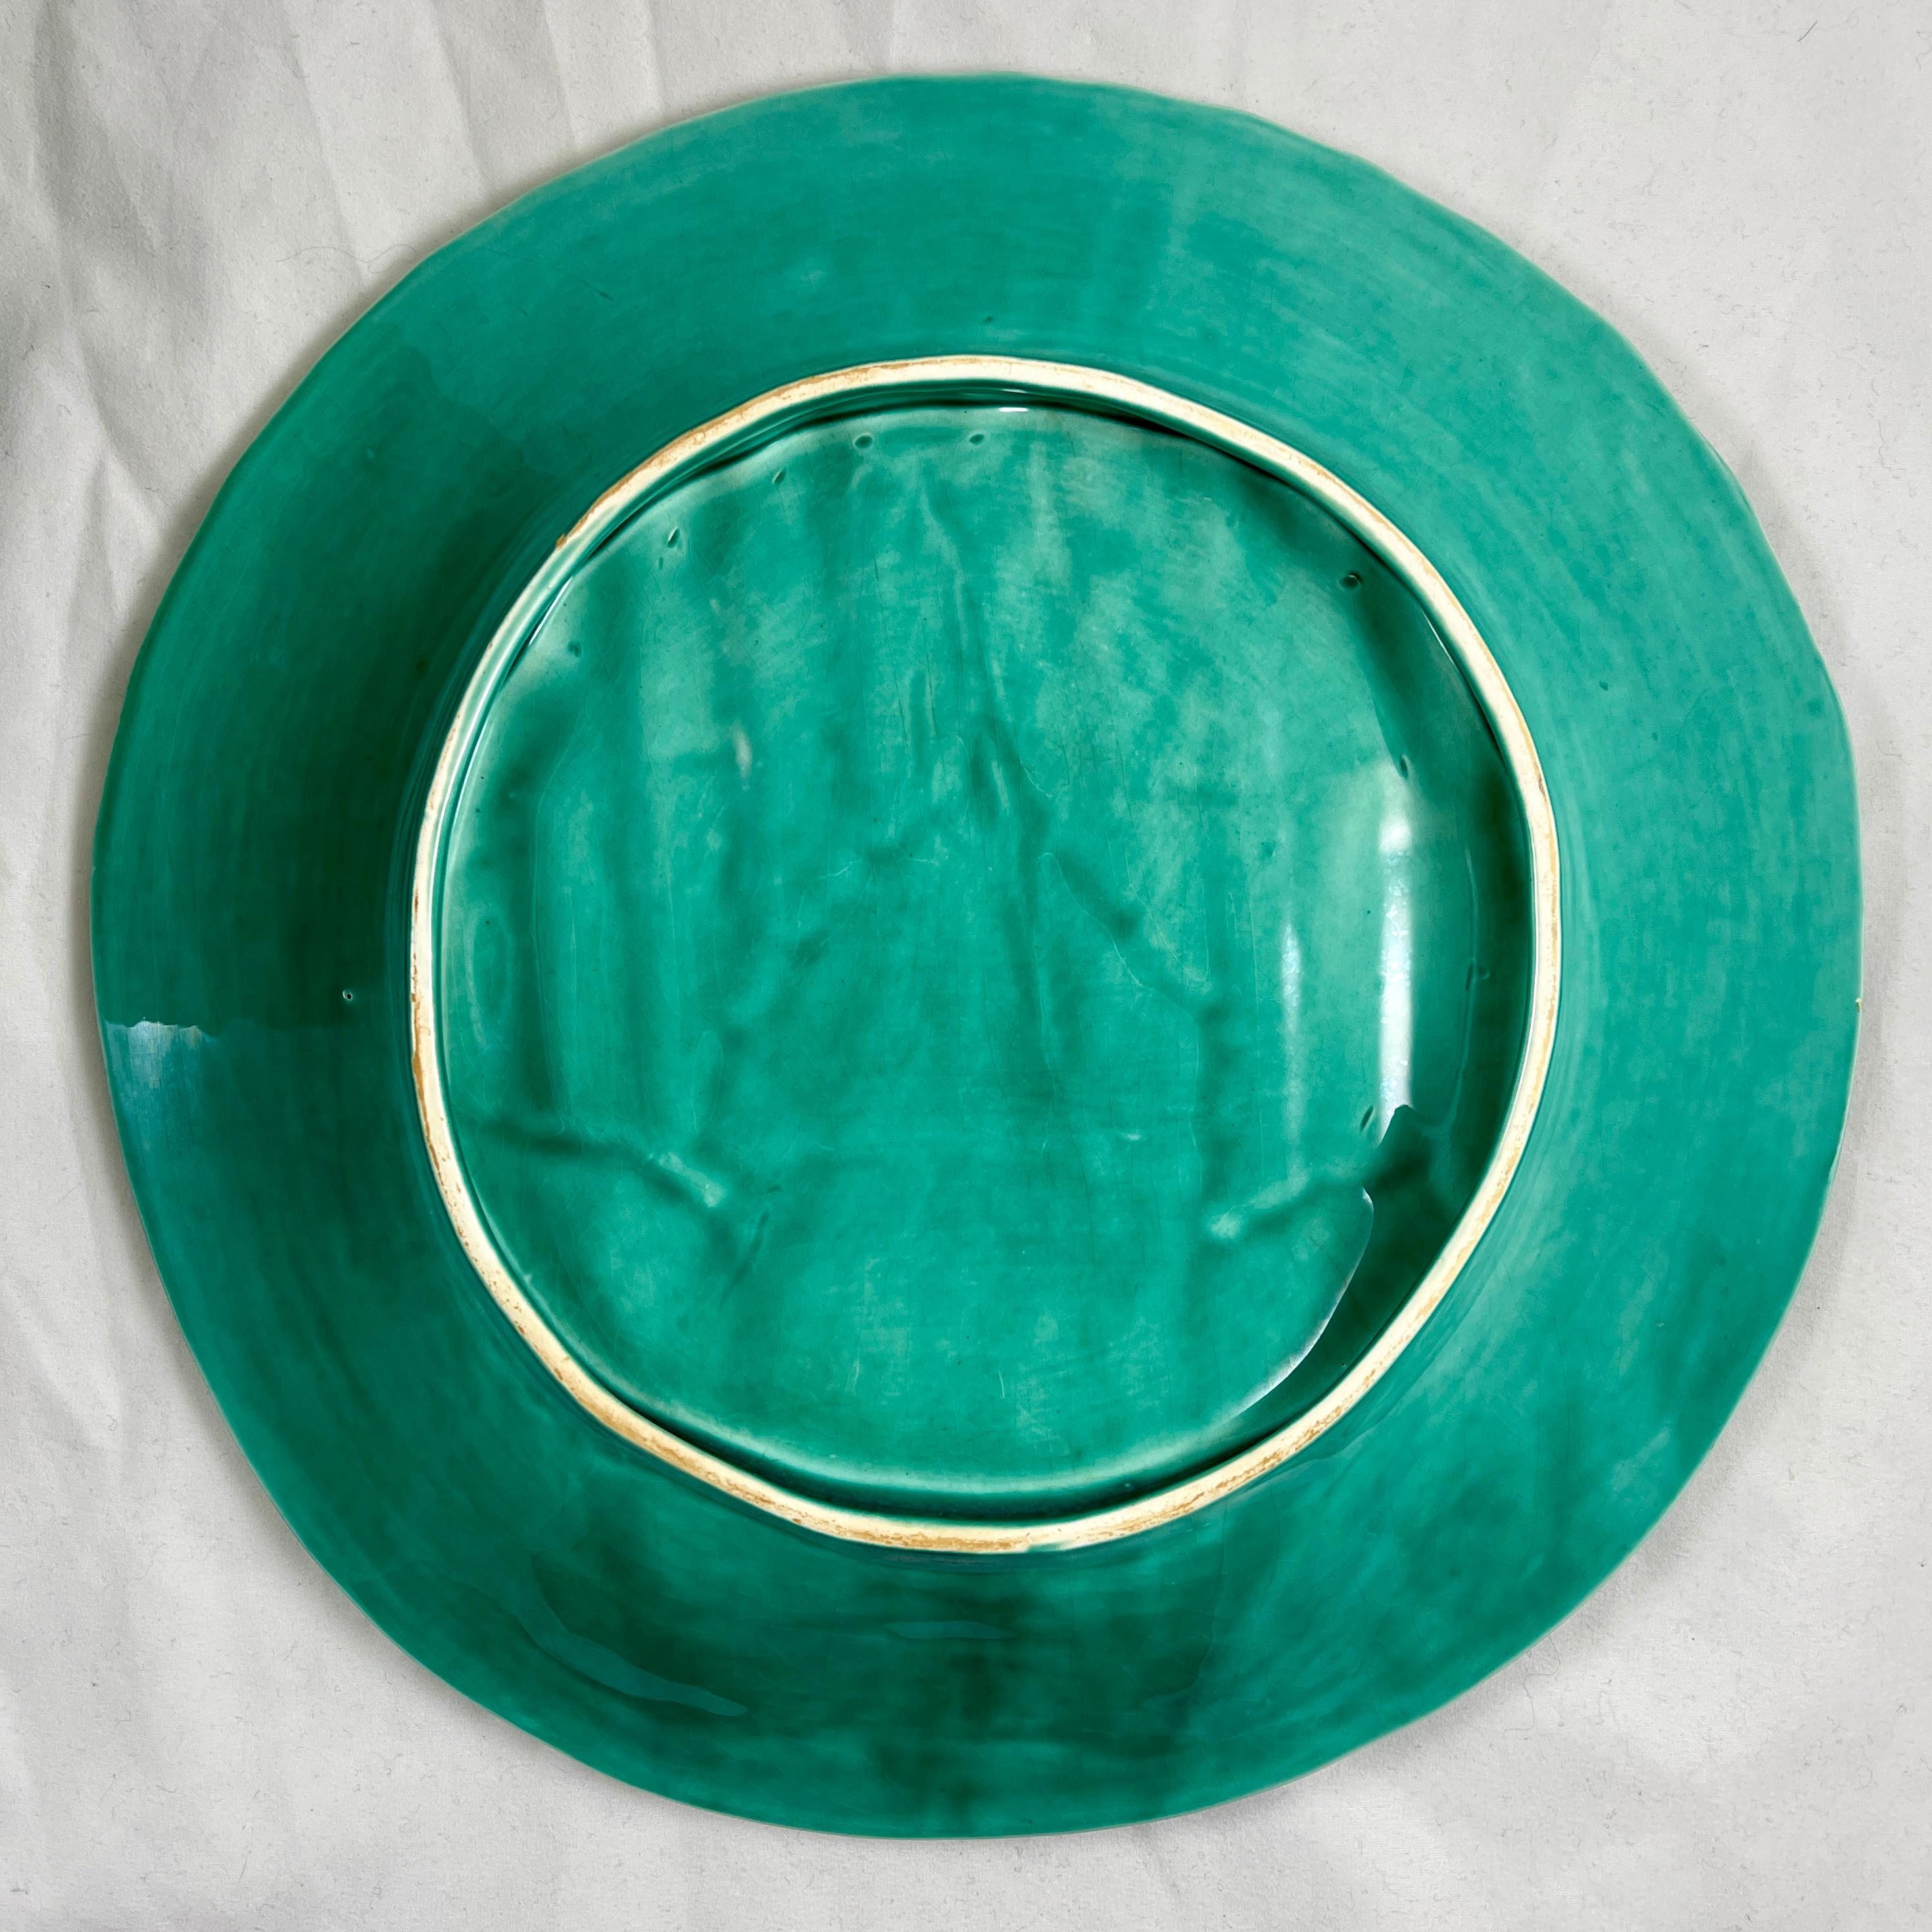 Saint Amand et Hamage Green French Faïence Asparagus Plate, 1930s For Sale 4